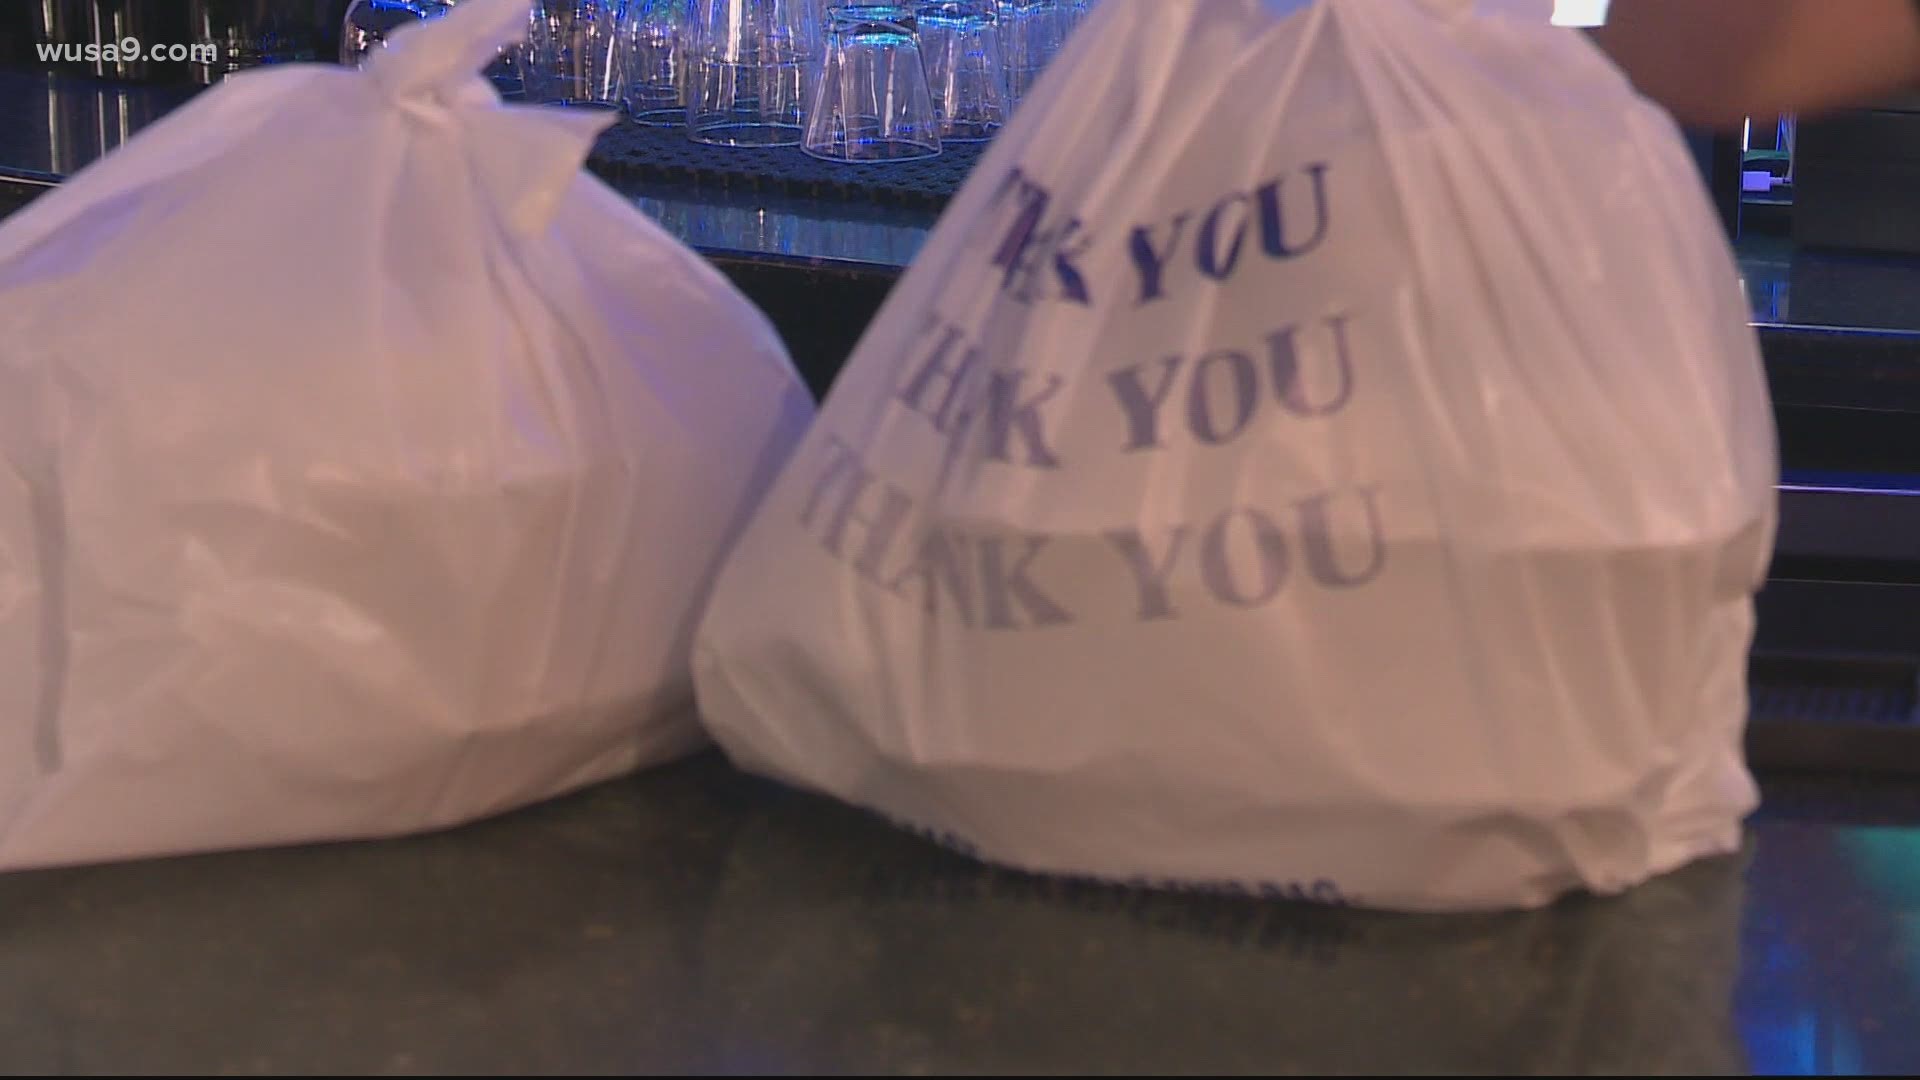 With more people turning to third-party online food delivery companies, Montgomery County officials warned customers about the impact to local restaurants.